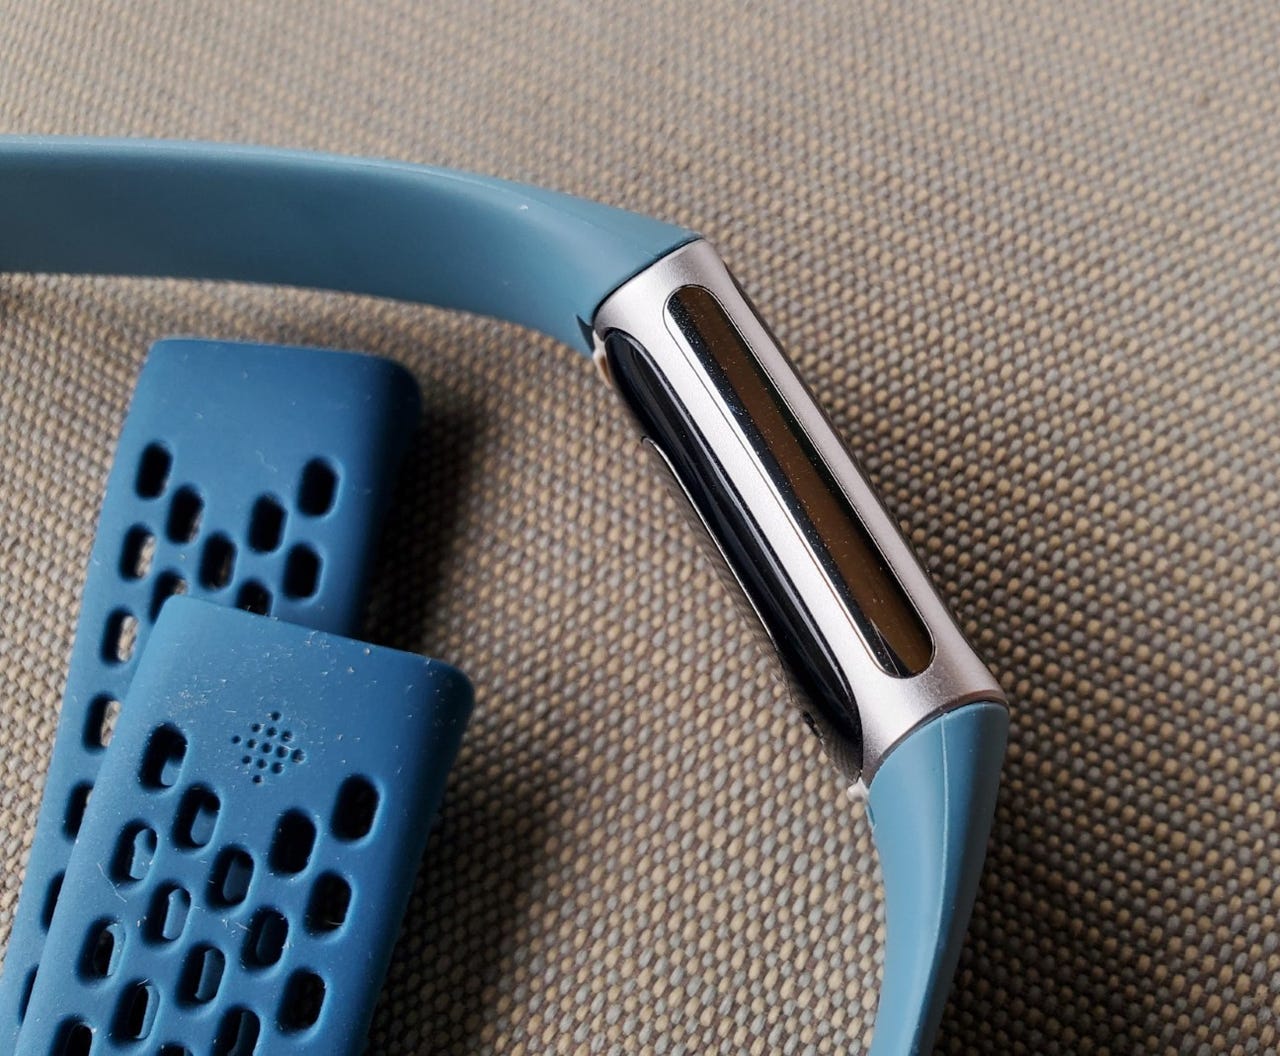 fitbit-charge-5-4.jpg